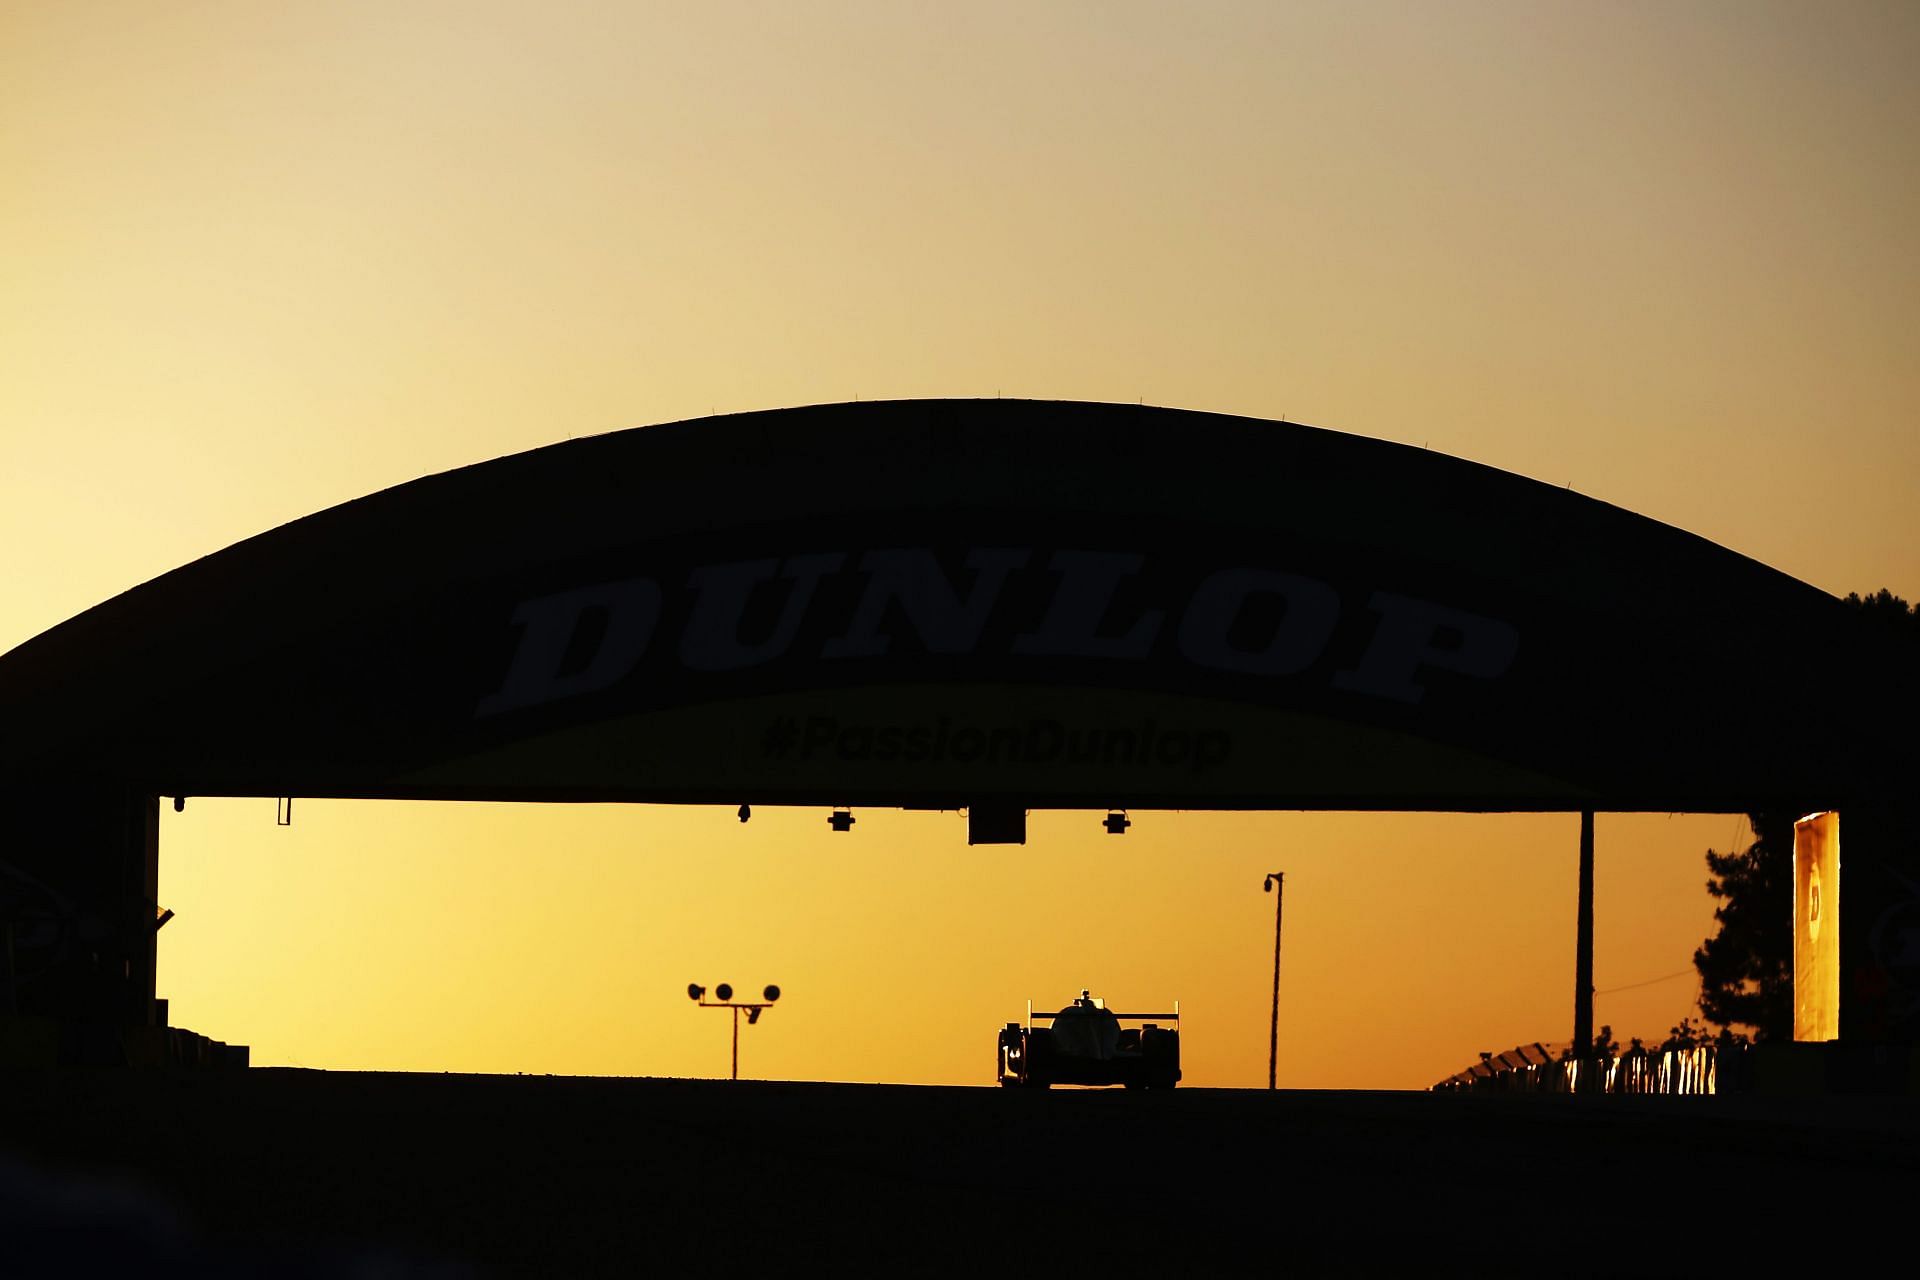 The #34 Inter Europol Competition Oreca 07 drives under the Dunlop Bridge at sunrise during the 24 Hours of Le Mans at the Circuit de la Sarthe in Le Mans, France (Photo by Ker Robertson/Getty Images)